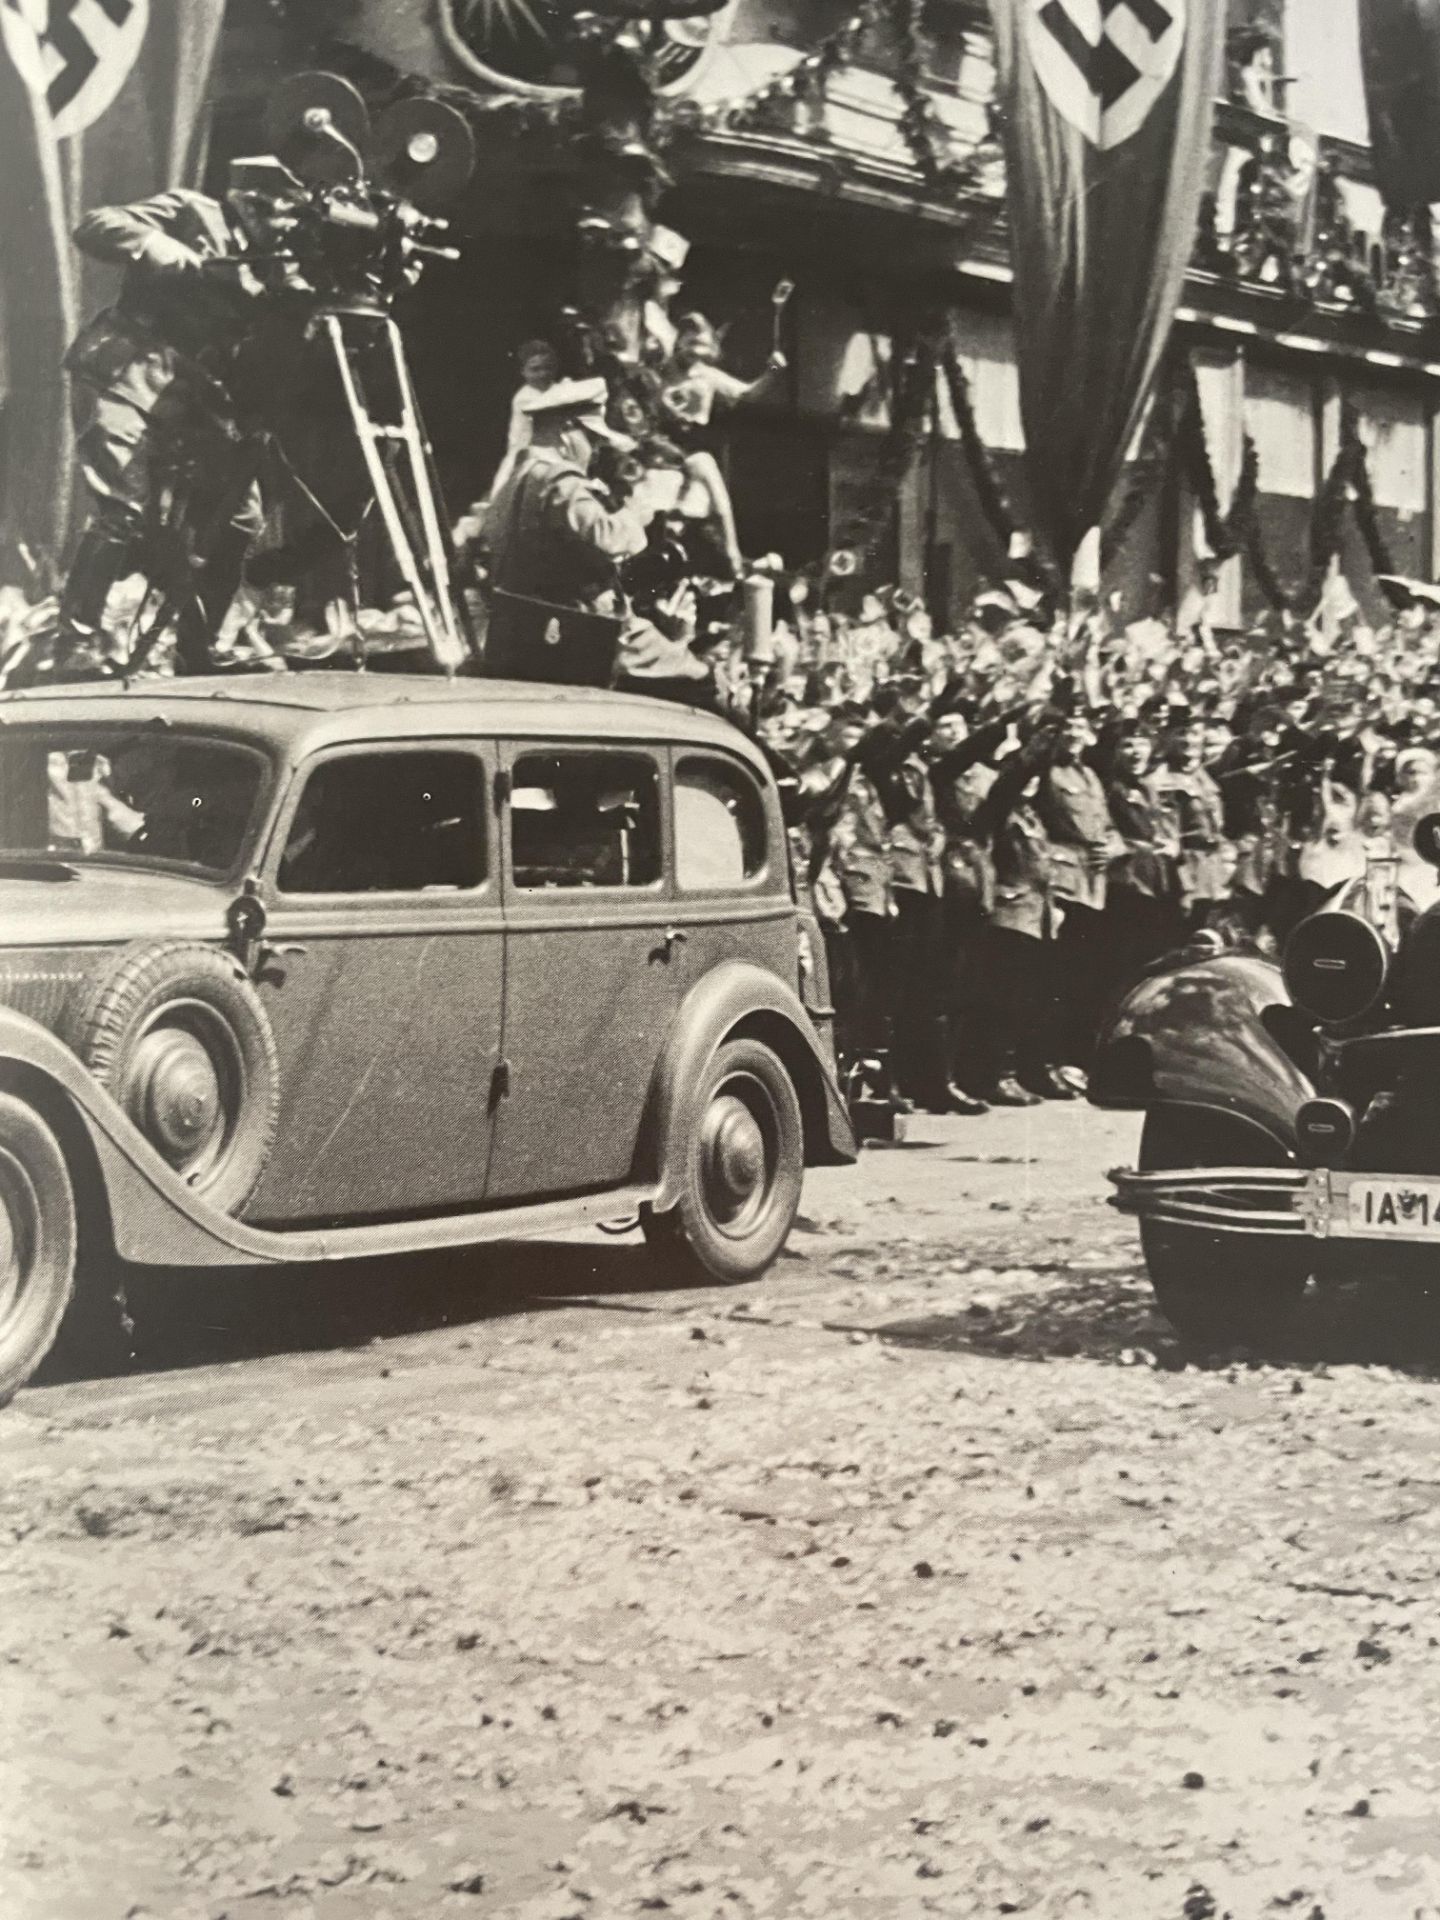 Germany "WWII, Adolf Hitler, Victory Parade" Print - Image 4 of 6